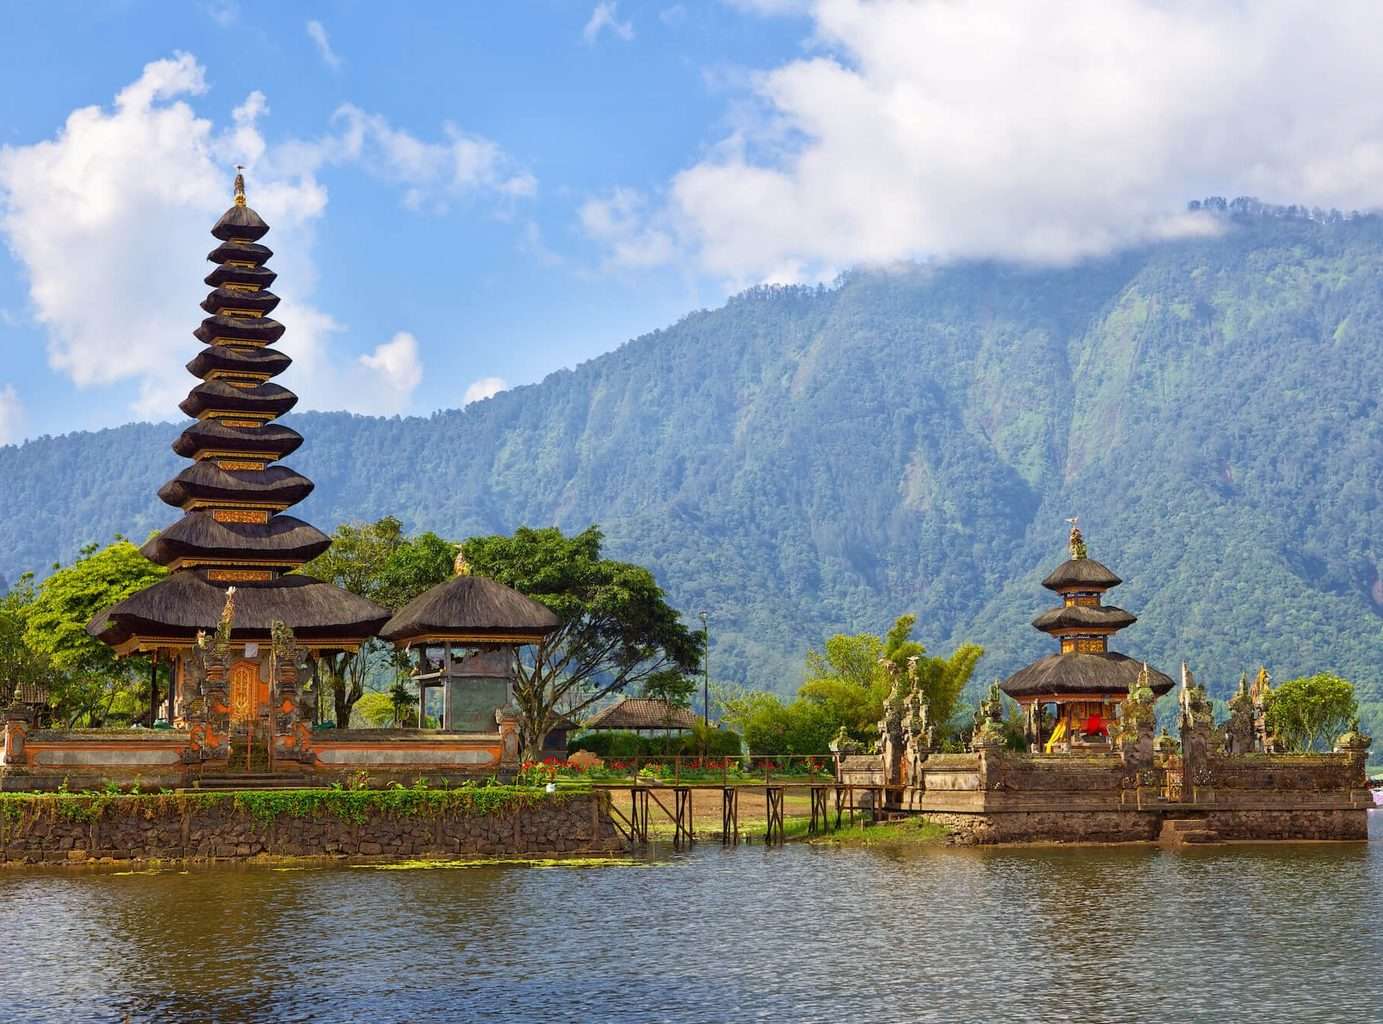 Luxury Bali Holidays - mountains, temple and water shot